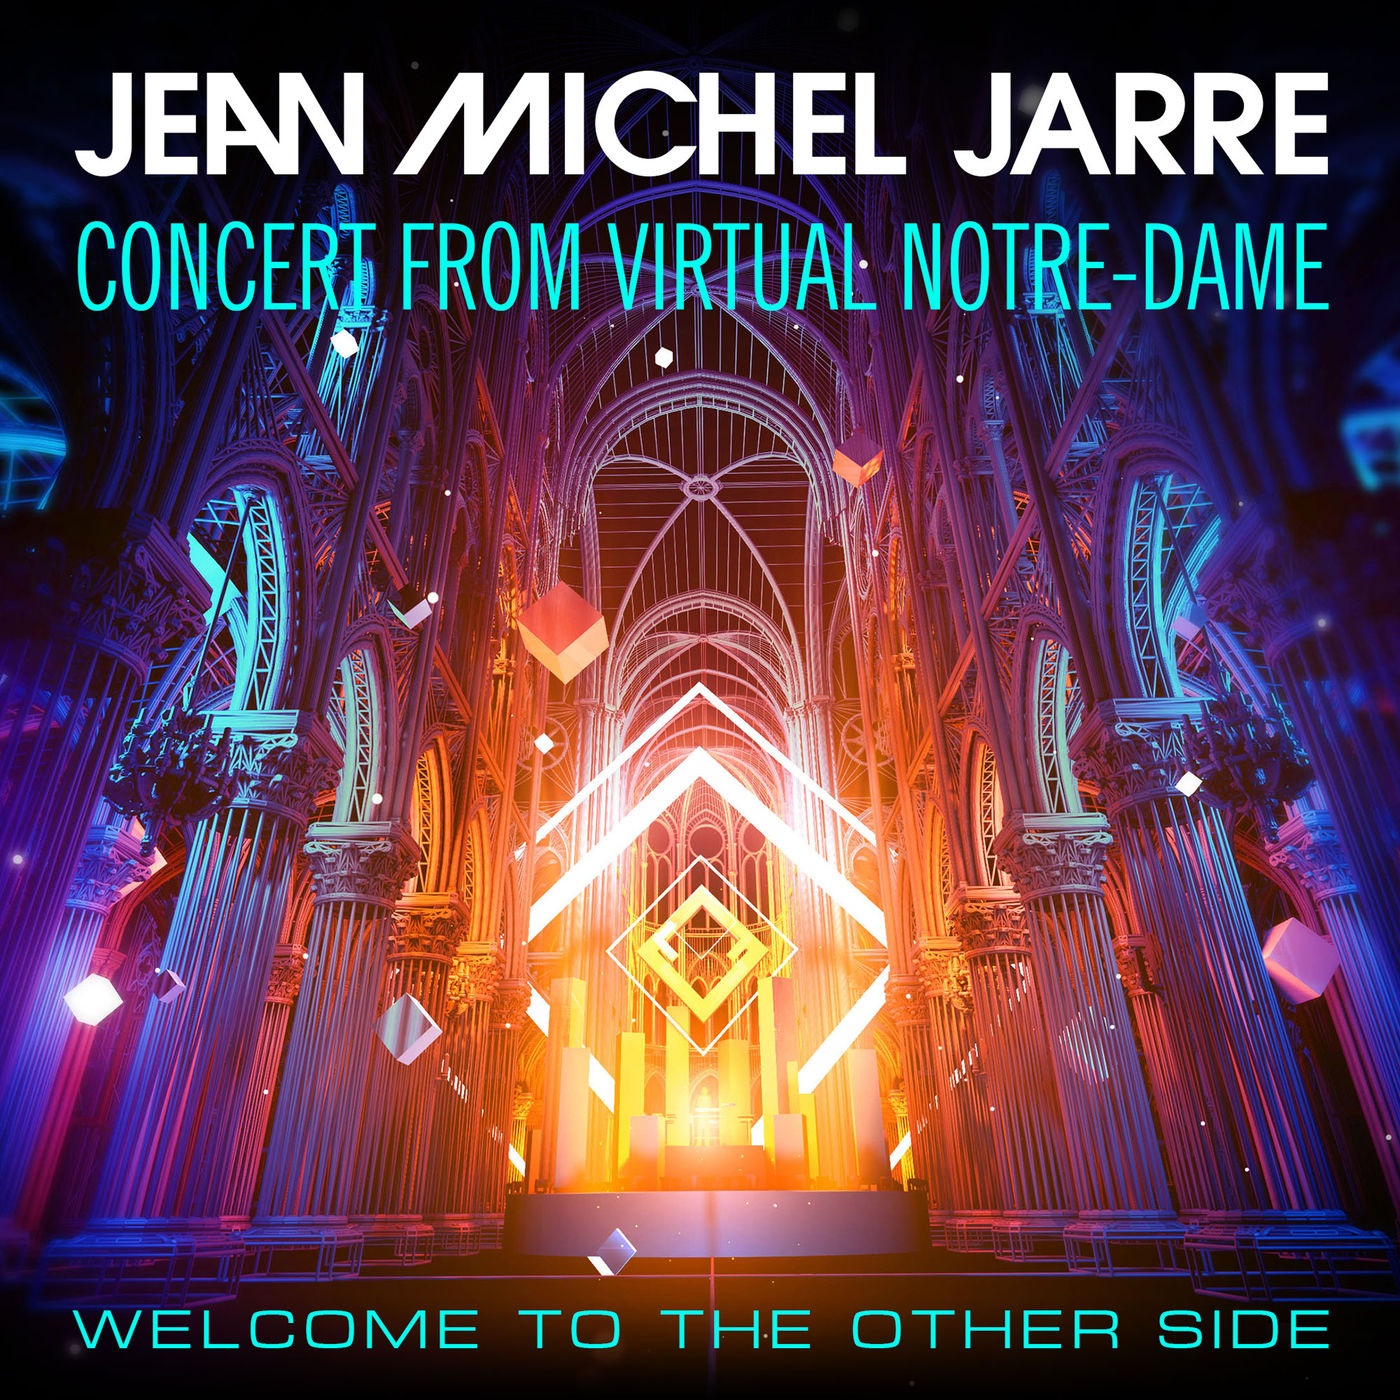 Jean Michel Jarre - Welcome To The Other Side (Concert From Virtual Notre-Dame) (2021) [FLAC 24bit/48kHz]